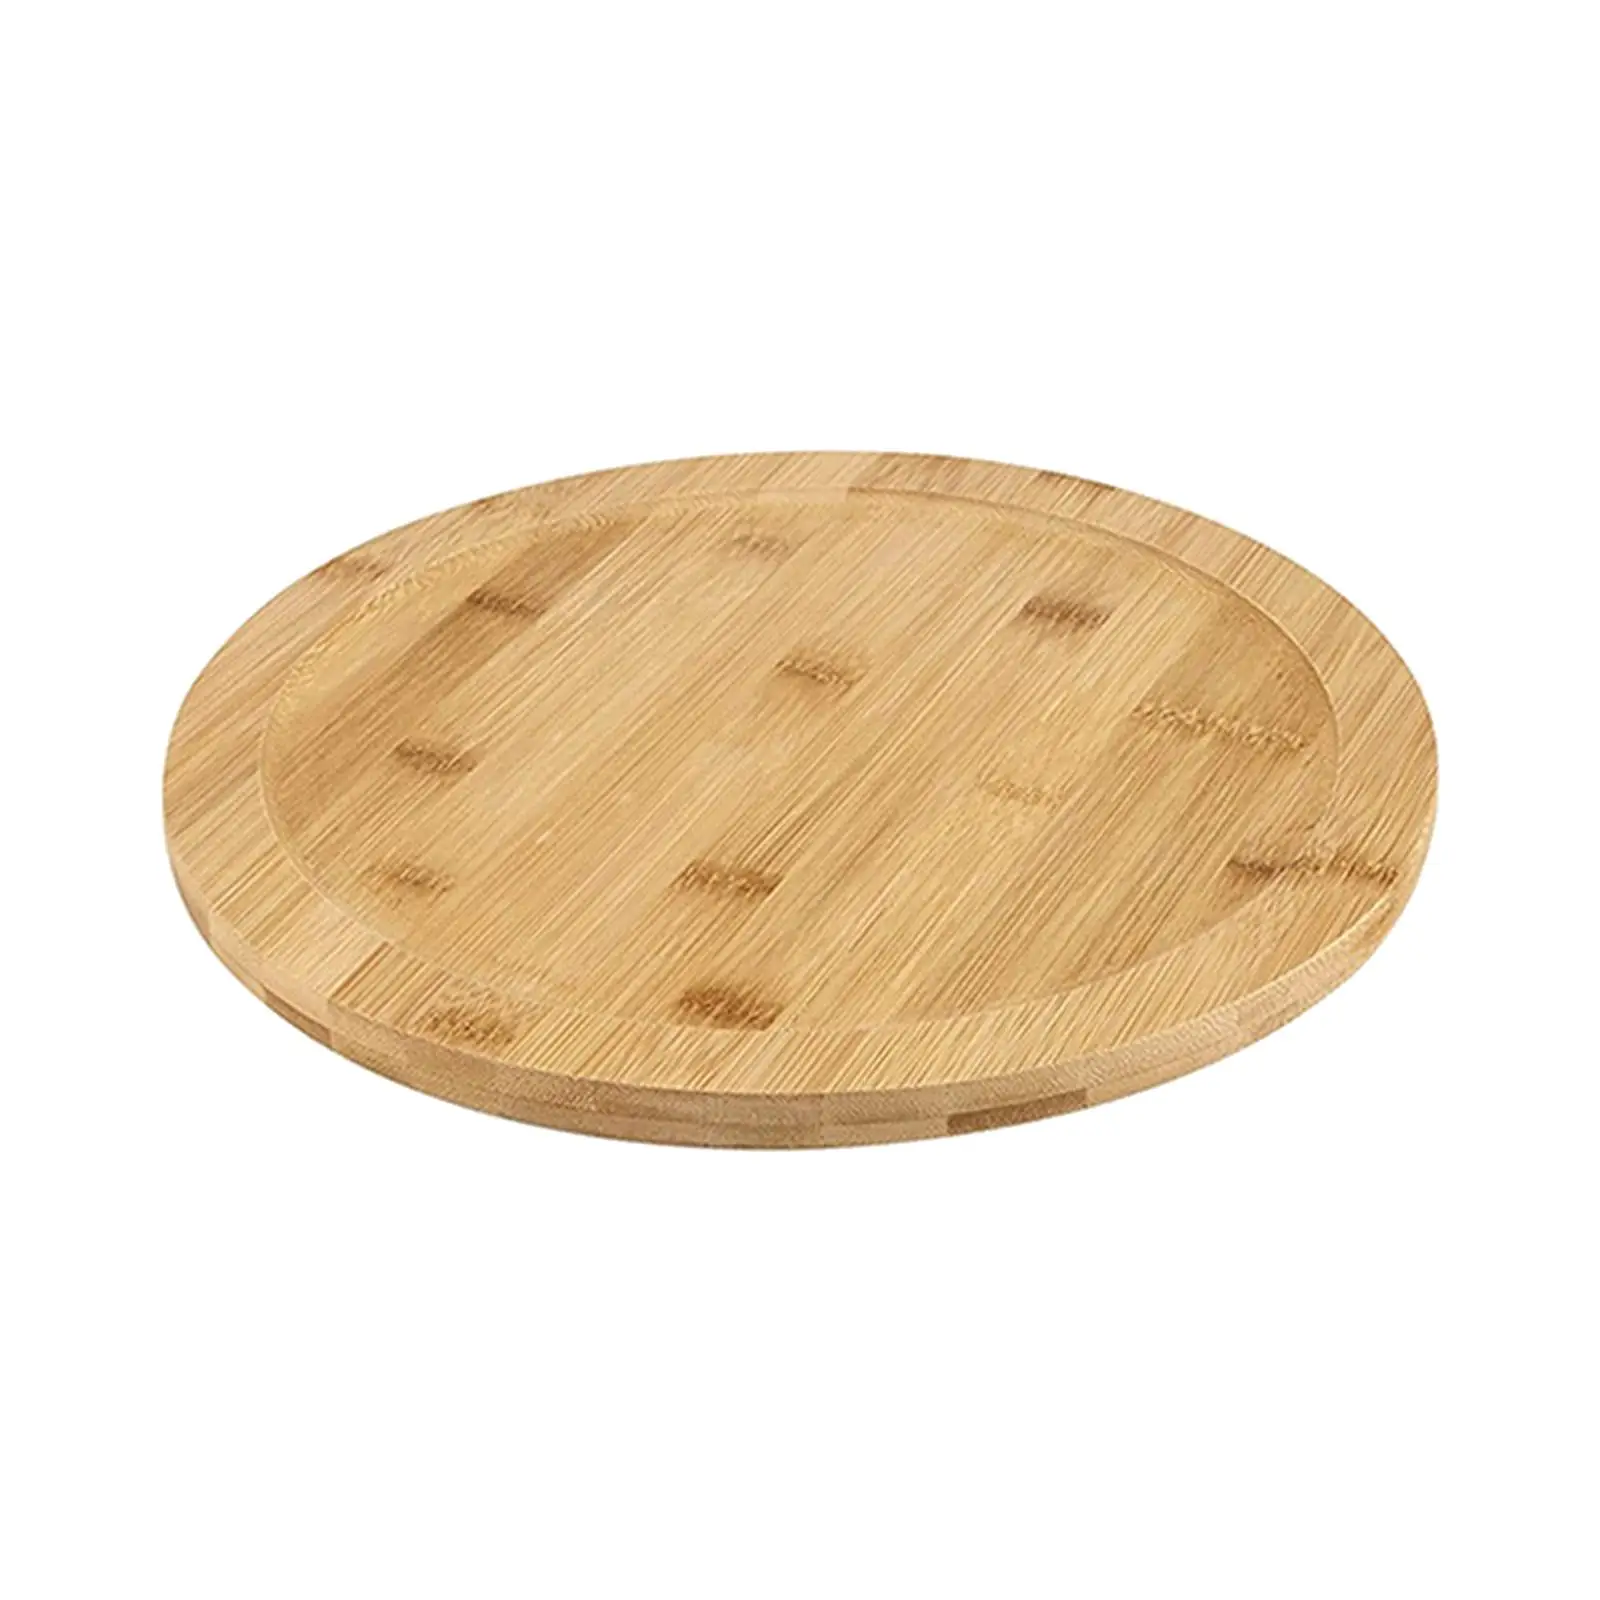 Wooden Round Rotating Plate Swivel Plate Rotating Board Wooden Rotating Dining Plate for Dining Table Kitchen Cabinet